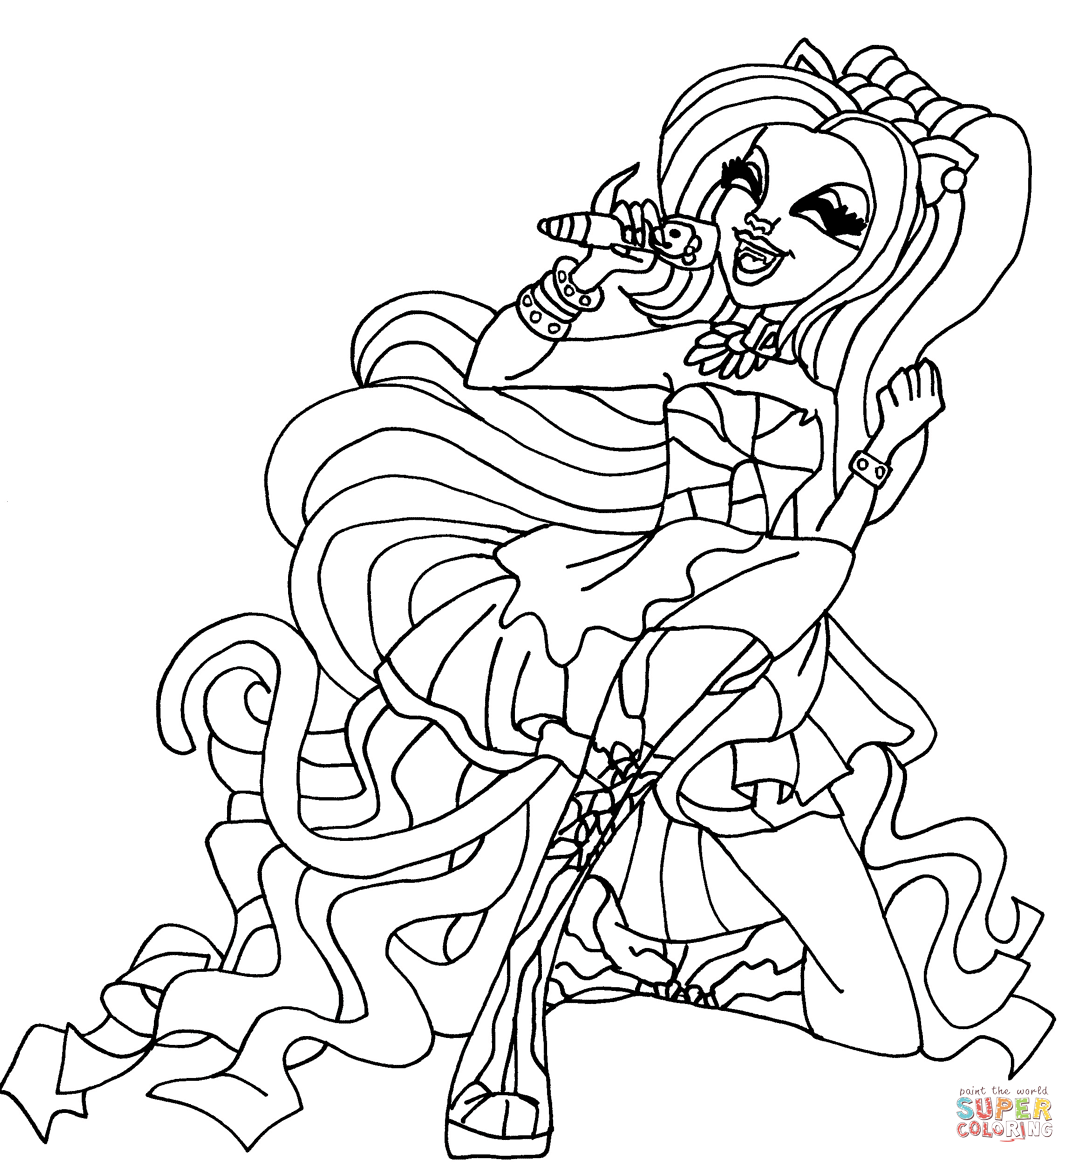 Catty Noir coloring page | Free Printable Coloring Pages